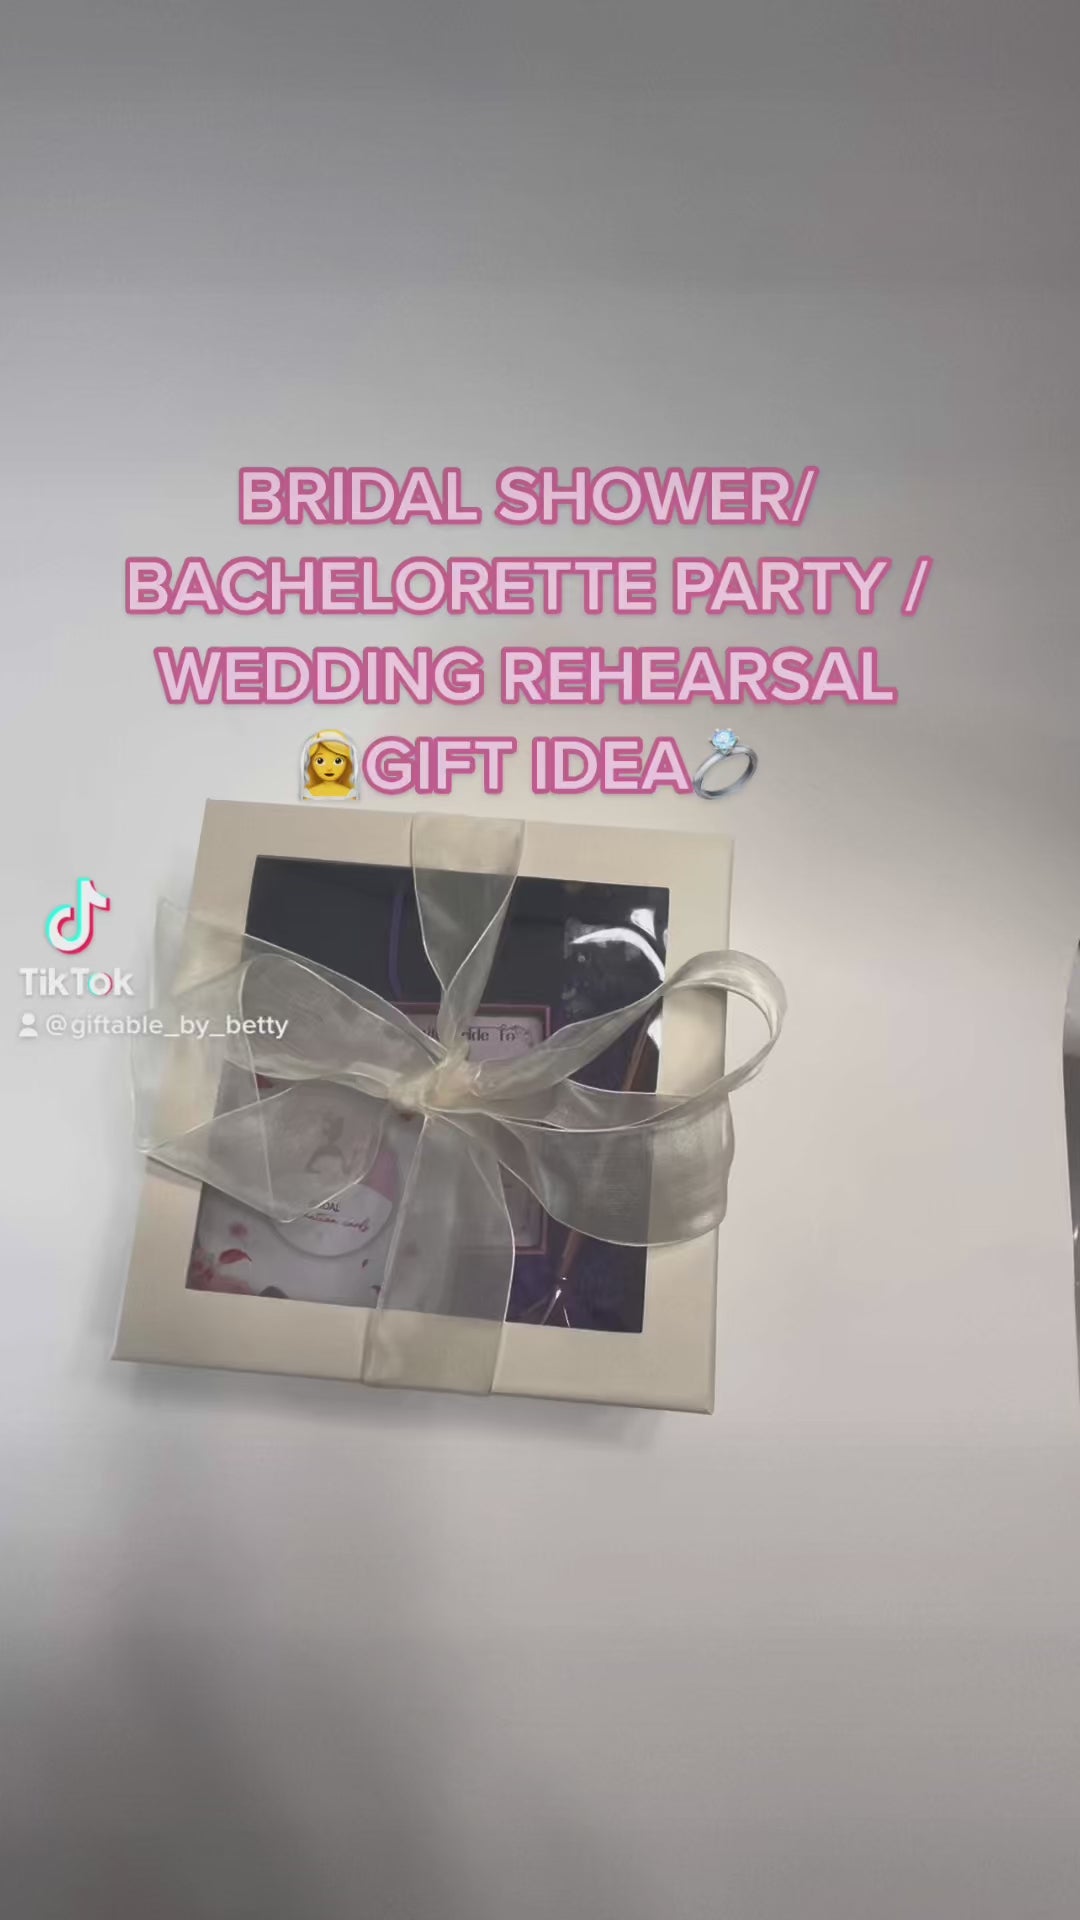 10 Amazing Wedding Gift Ideas For Couples - You Should Check Out!